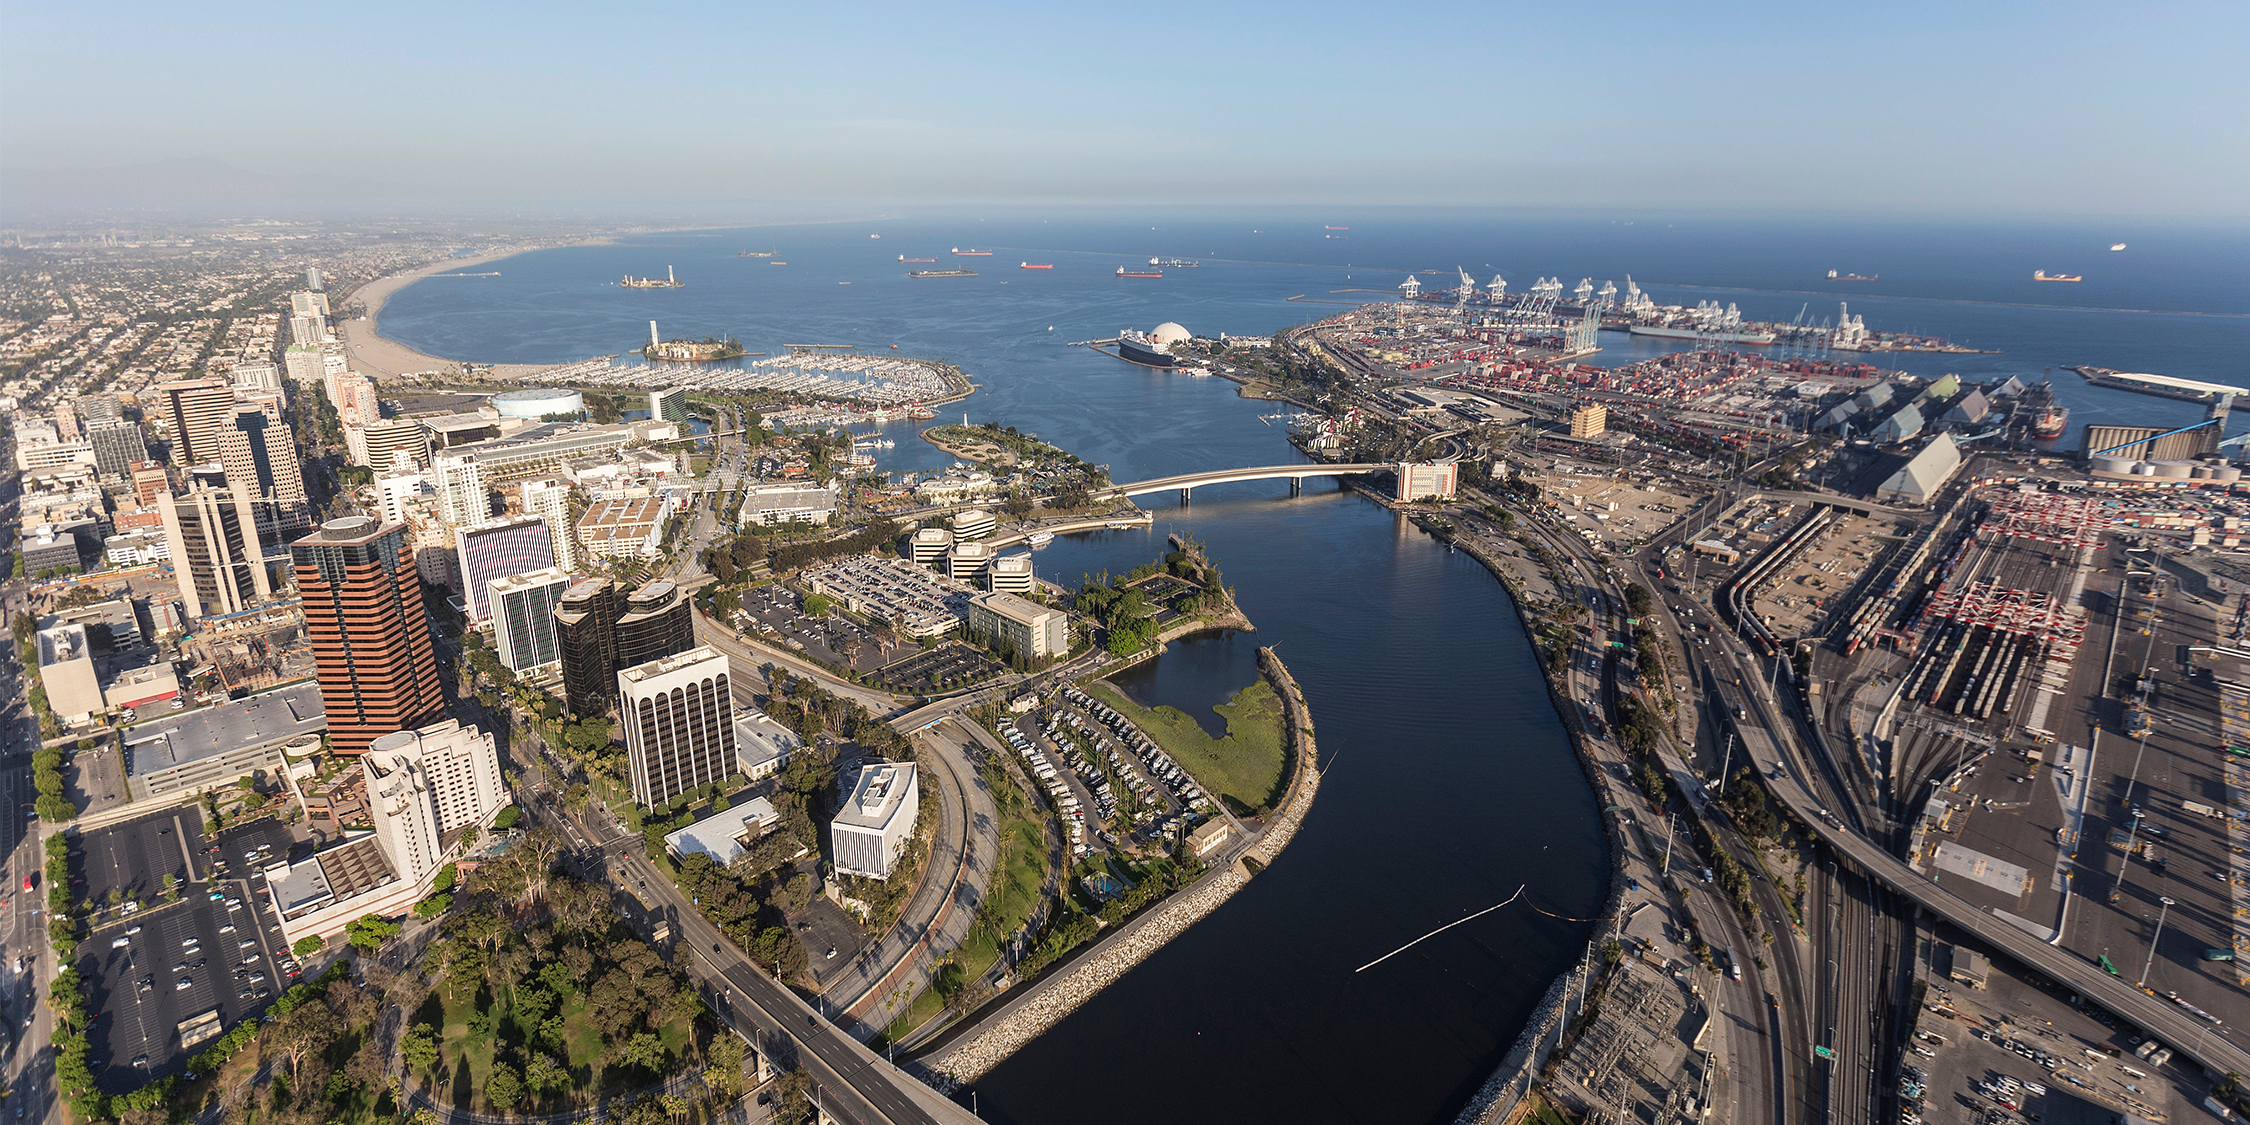 The Positive Economic Impact of a New Industry: A Long Beach Case Study